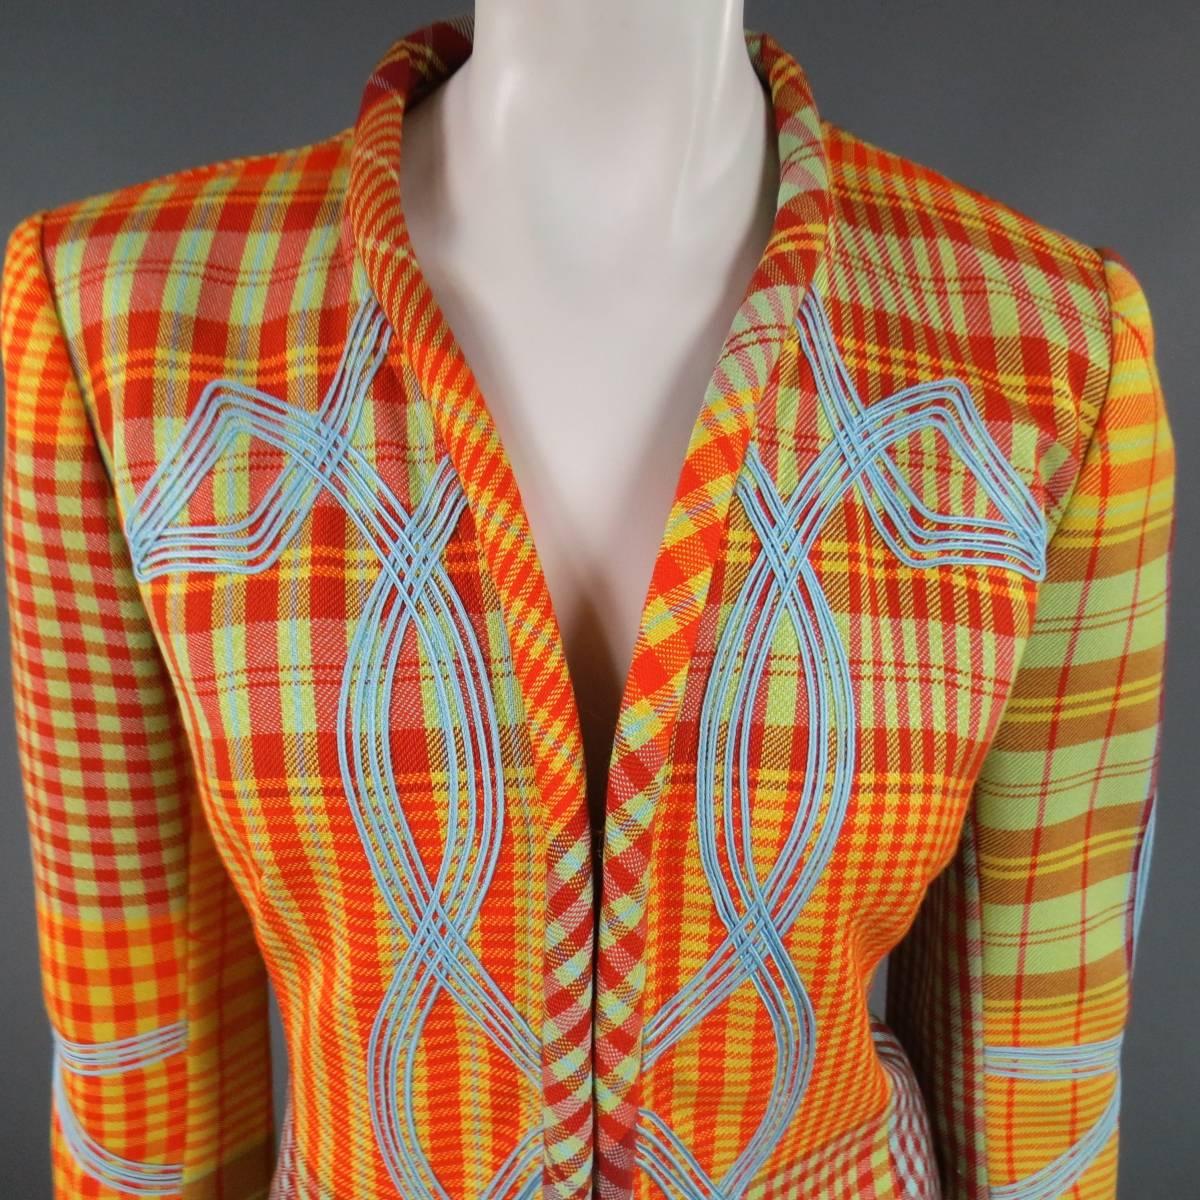 This fabulous CHRISTIAN LACROIX jacket comes in a bold, colorful plaid with hints of orange, yellow burgundy, mint and blue and features a a thick band collar, hook eye closures, and symmetrical blue pattern applique. Made in France.
 
Excellent